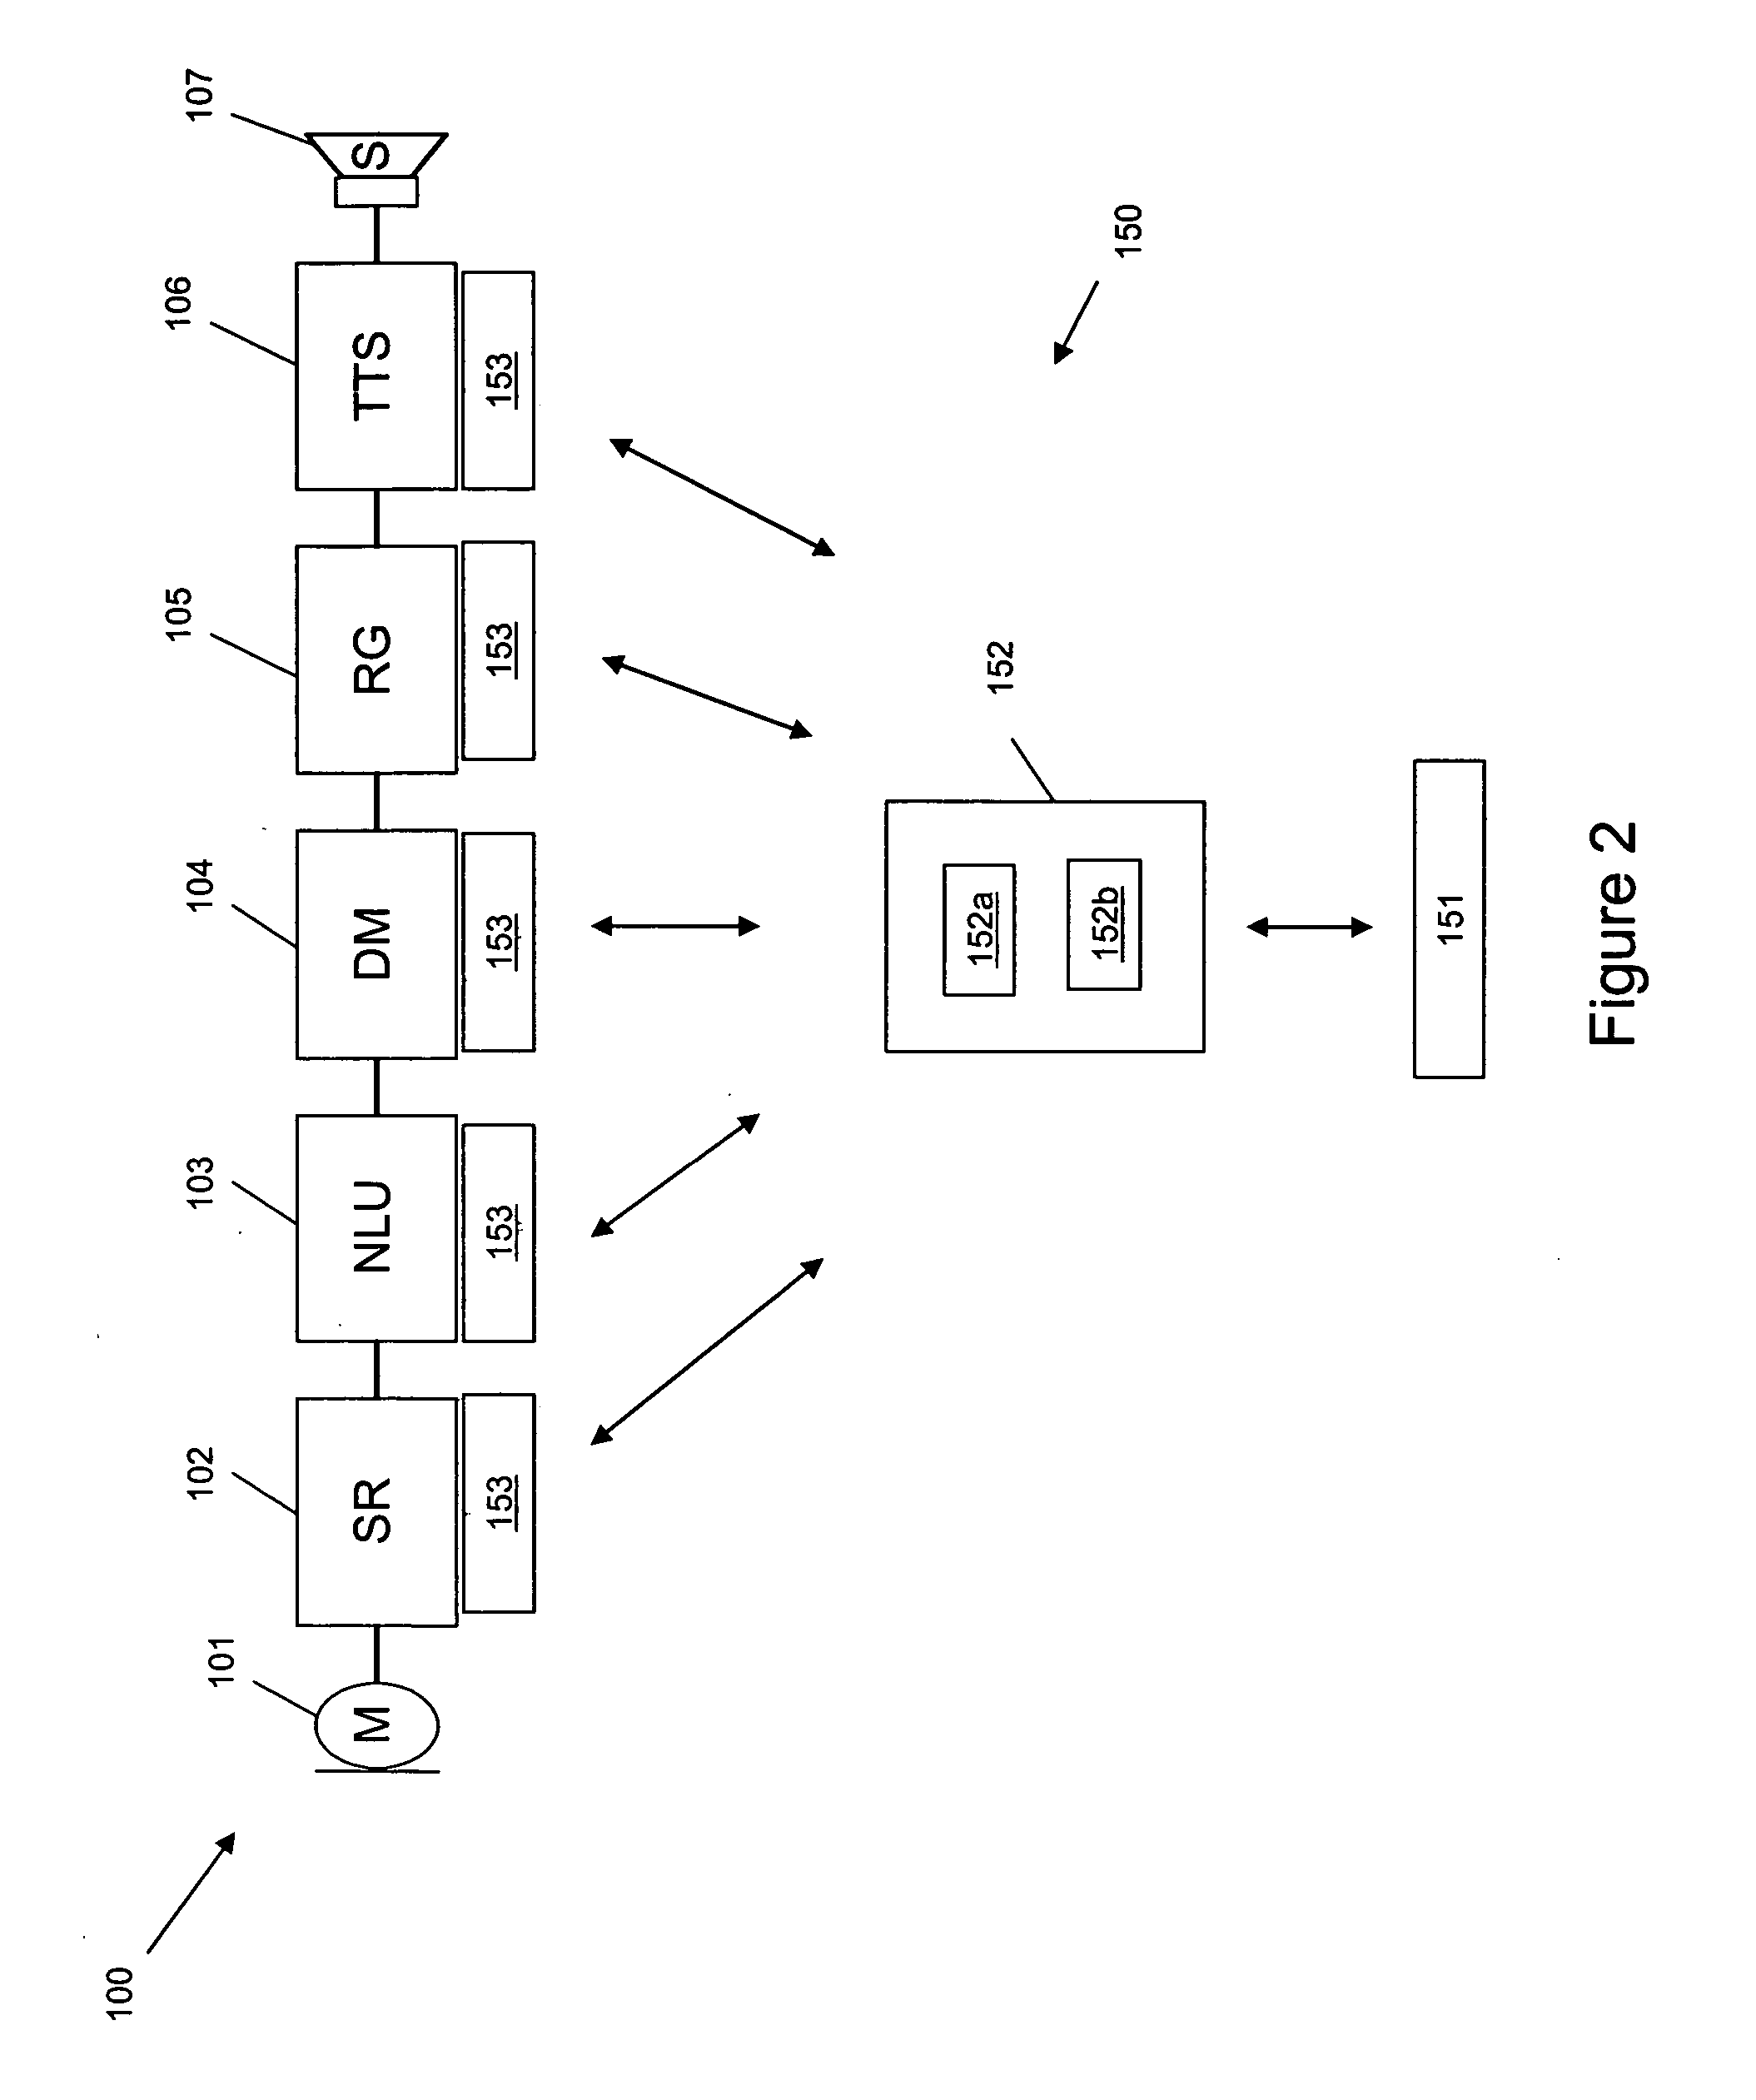 Method and system to parameterize dialog systems for the purpose of branding